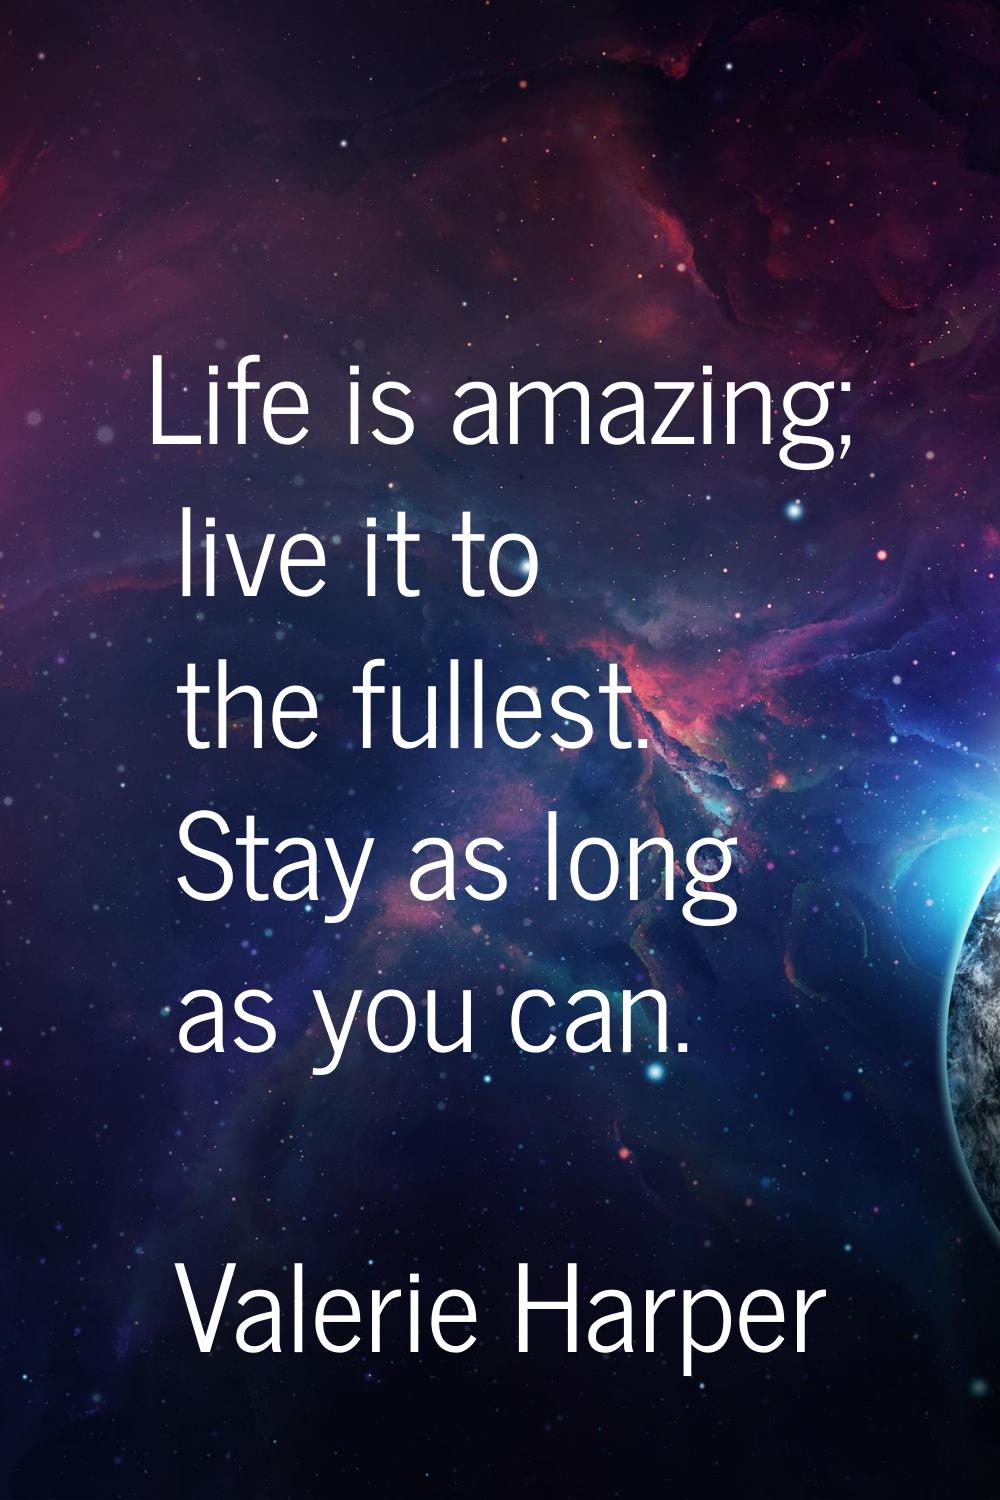 Life is amazing; live it to the fullest. Stay as long as you can.